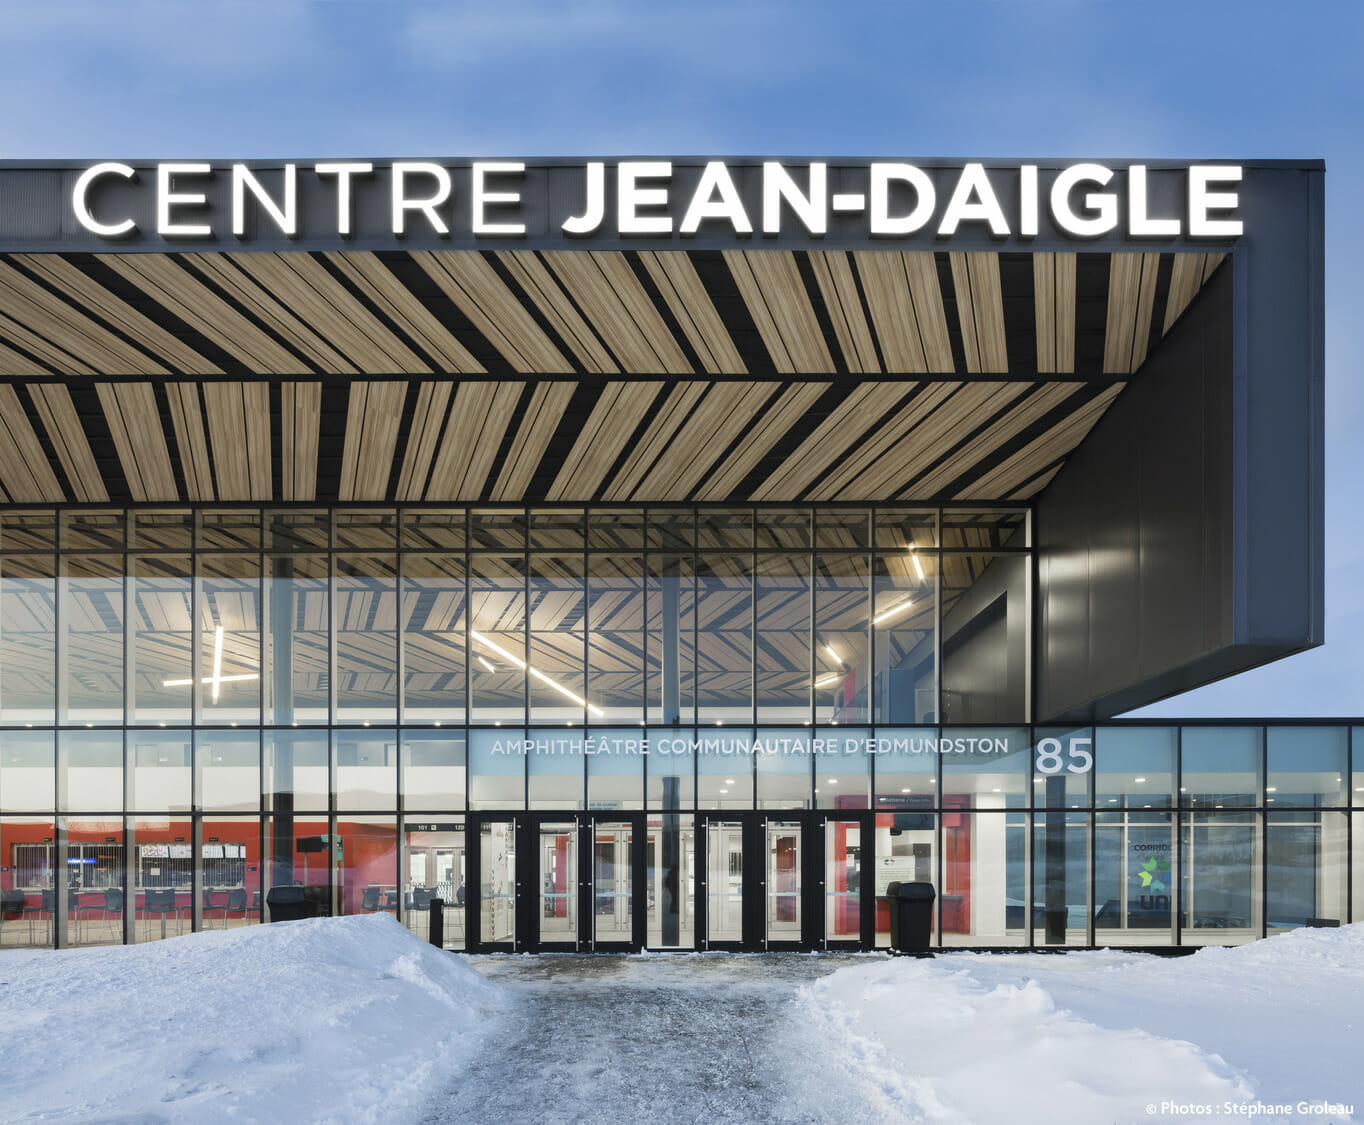 A building with snow on it and a sign that says centre jean-daigle.